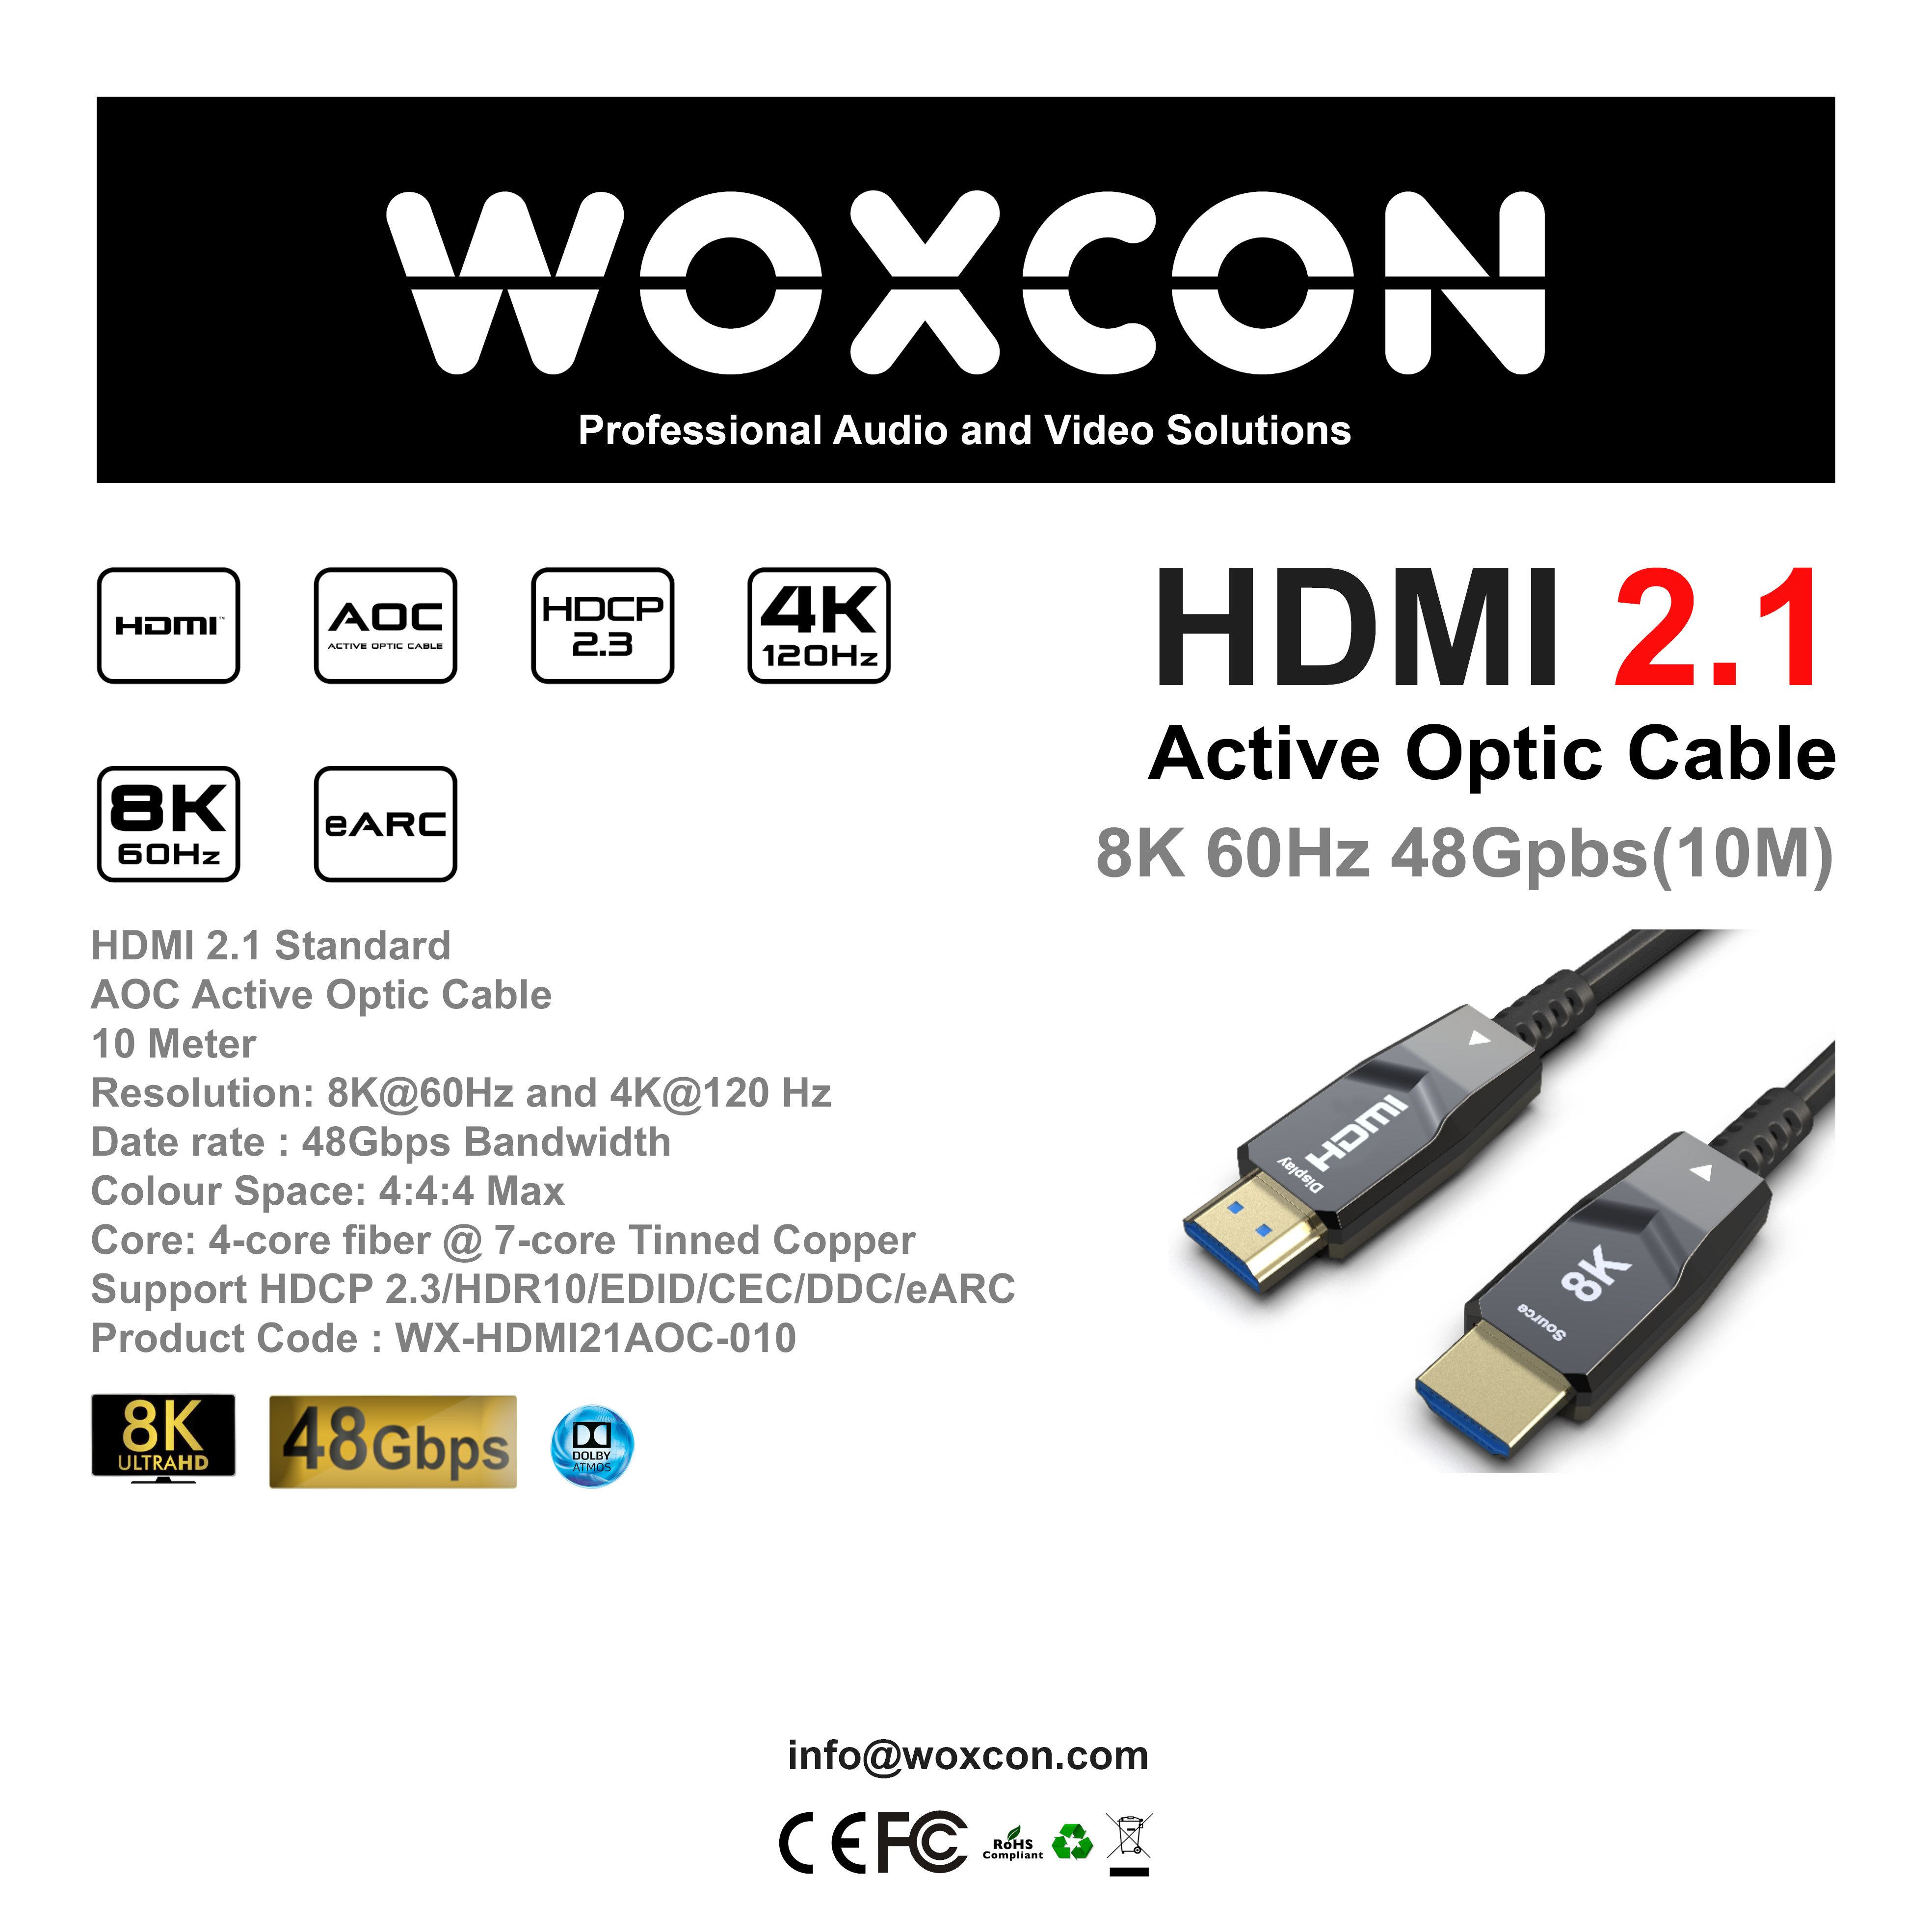 HDMI 2.1 Hybrid Active Optic Cable 8K supported 10 mt